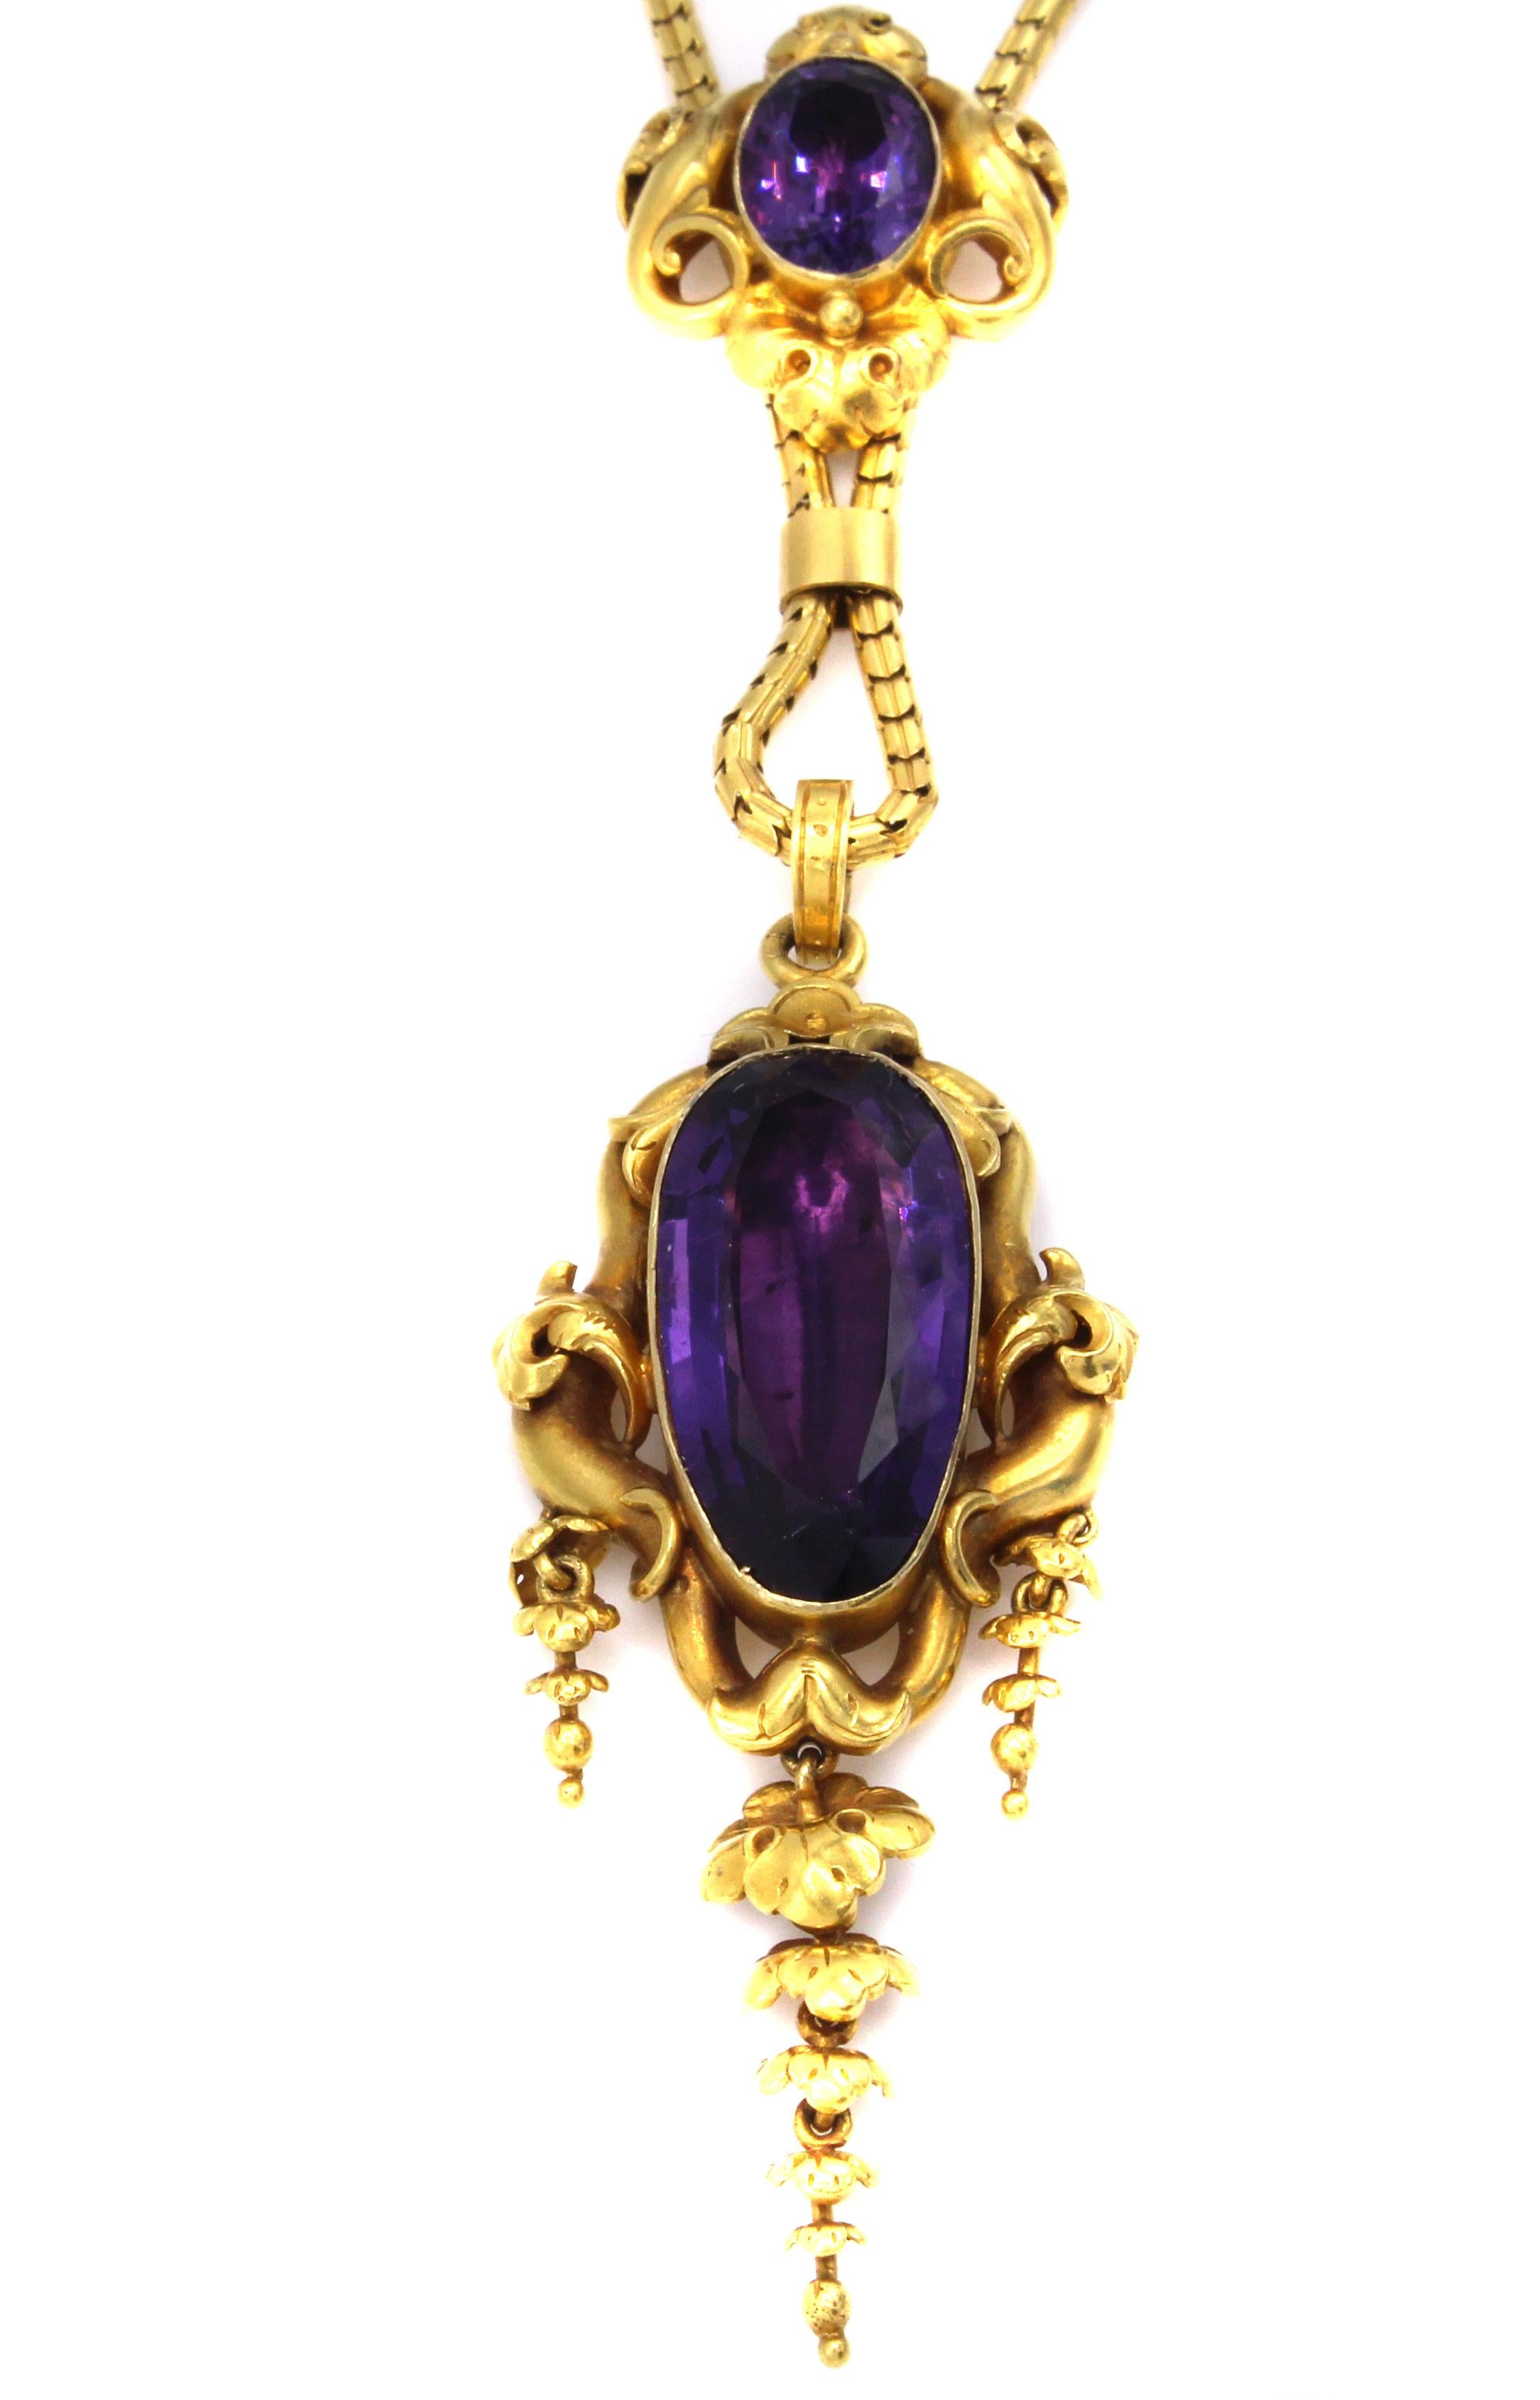 Beautifully designed and amazingly well handcrafted this Victorian slide pendant necklace from ca 1875 is a true manifest to this romantic era. The pendant section of this necklace features a deep purple foiled back elongated amethyst measured to